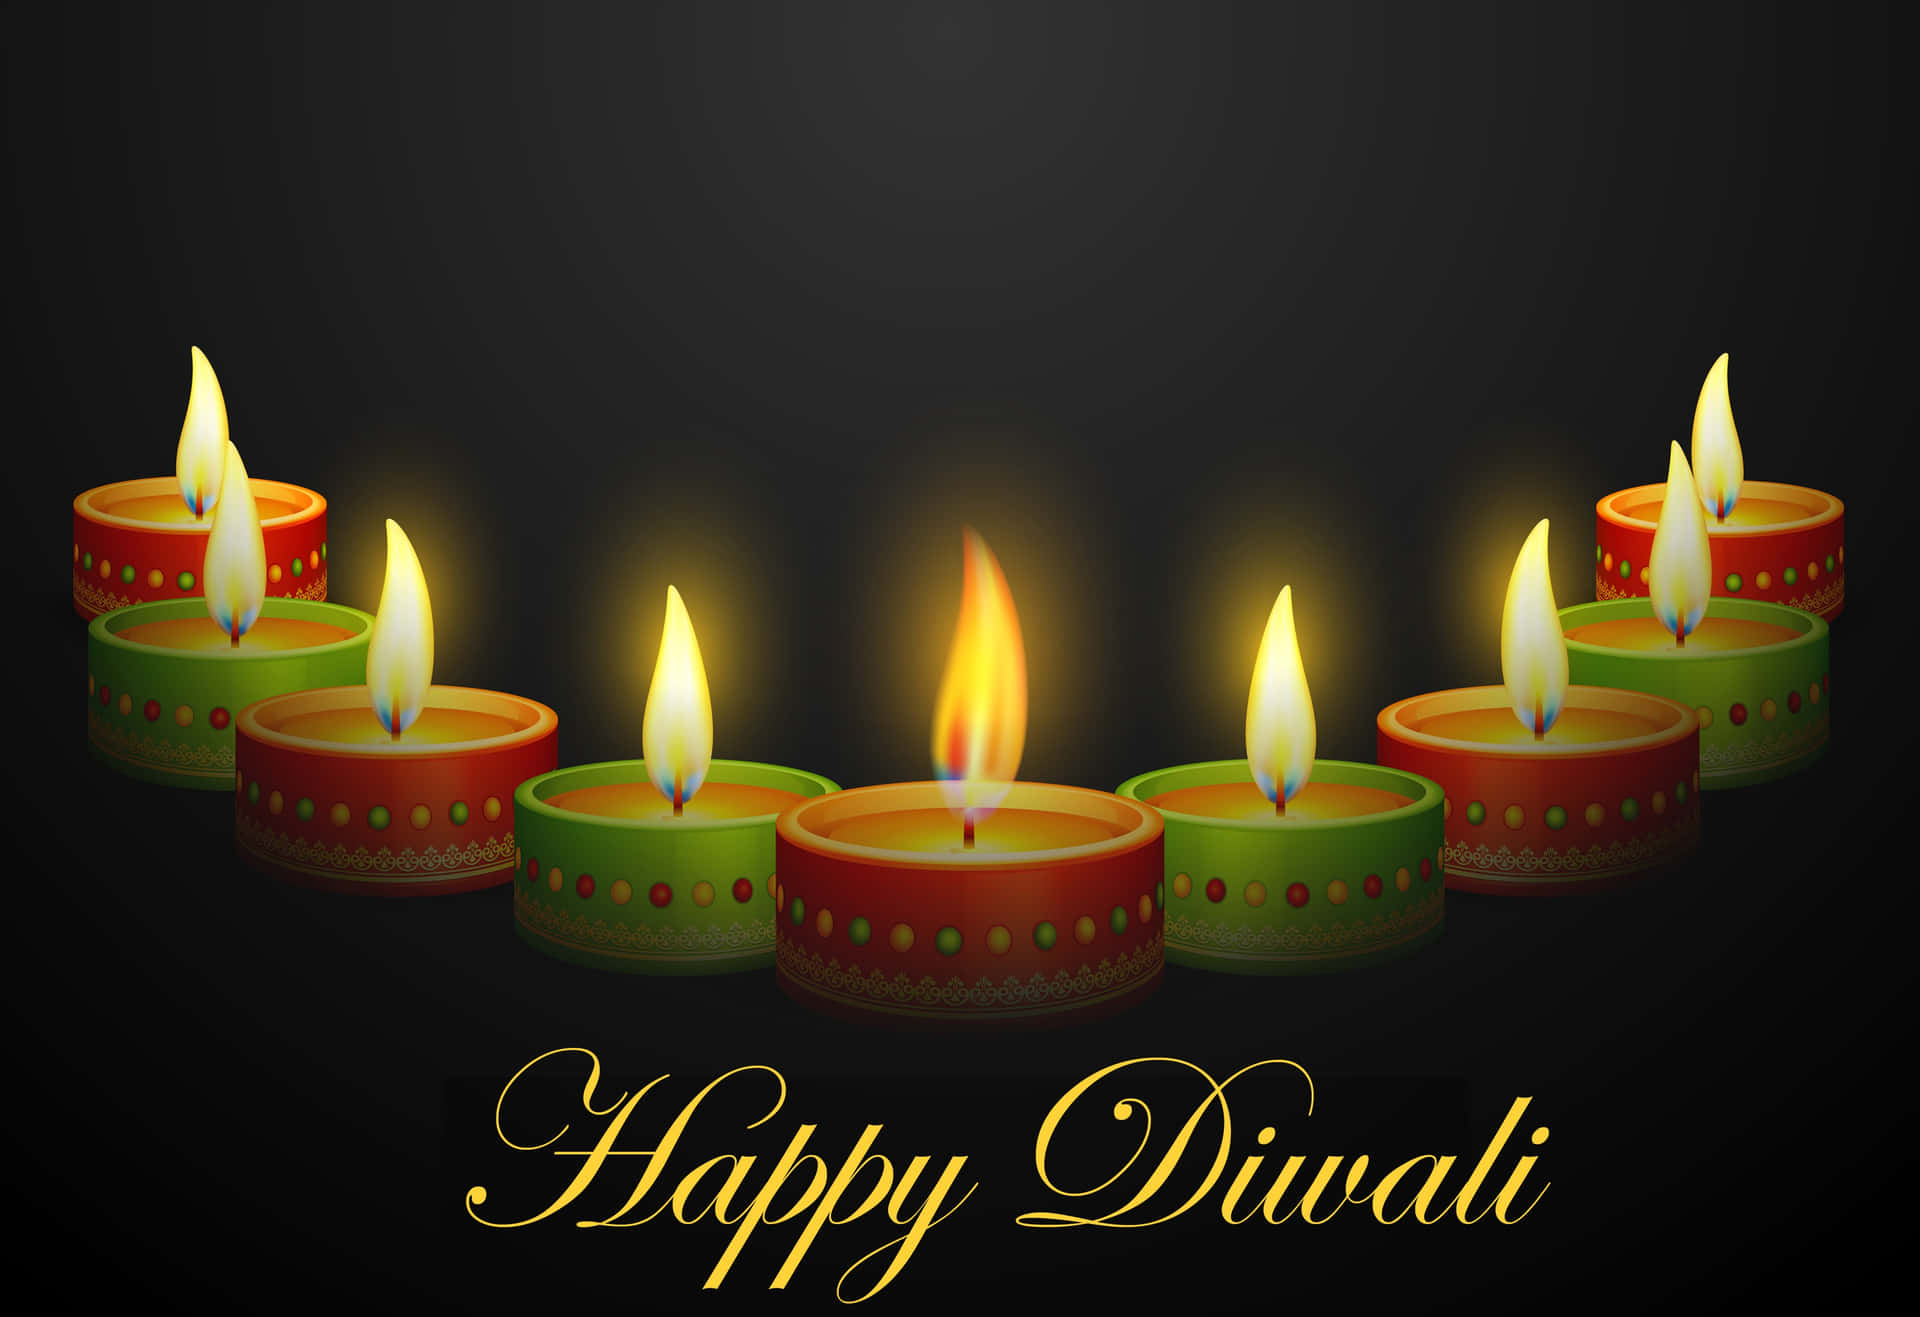 Happy Diwali Greetings With Candles